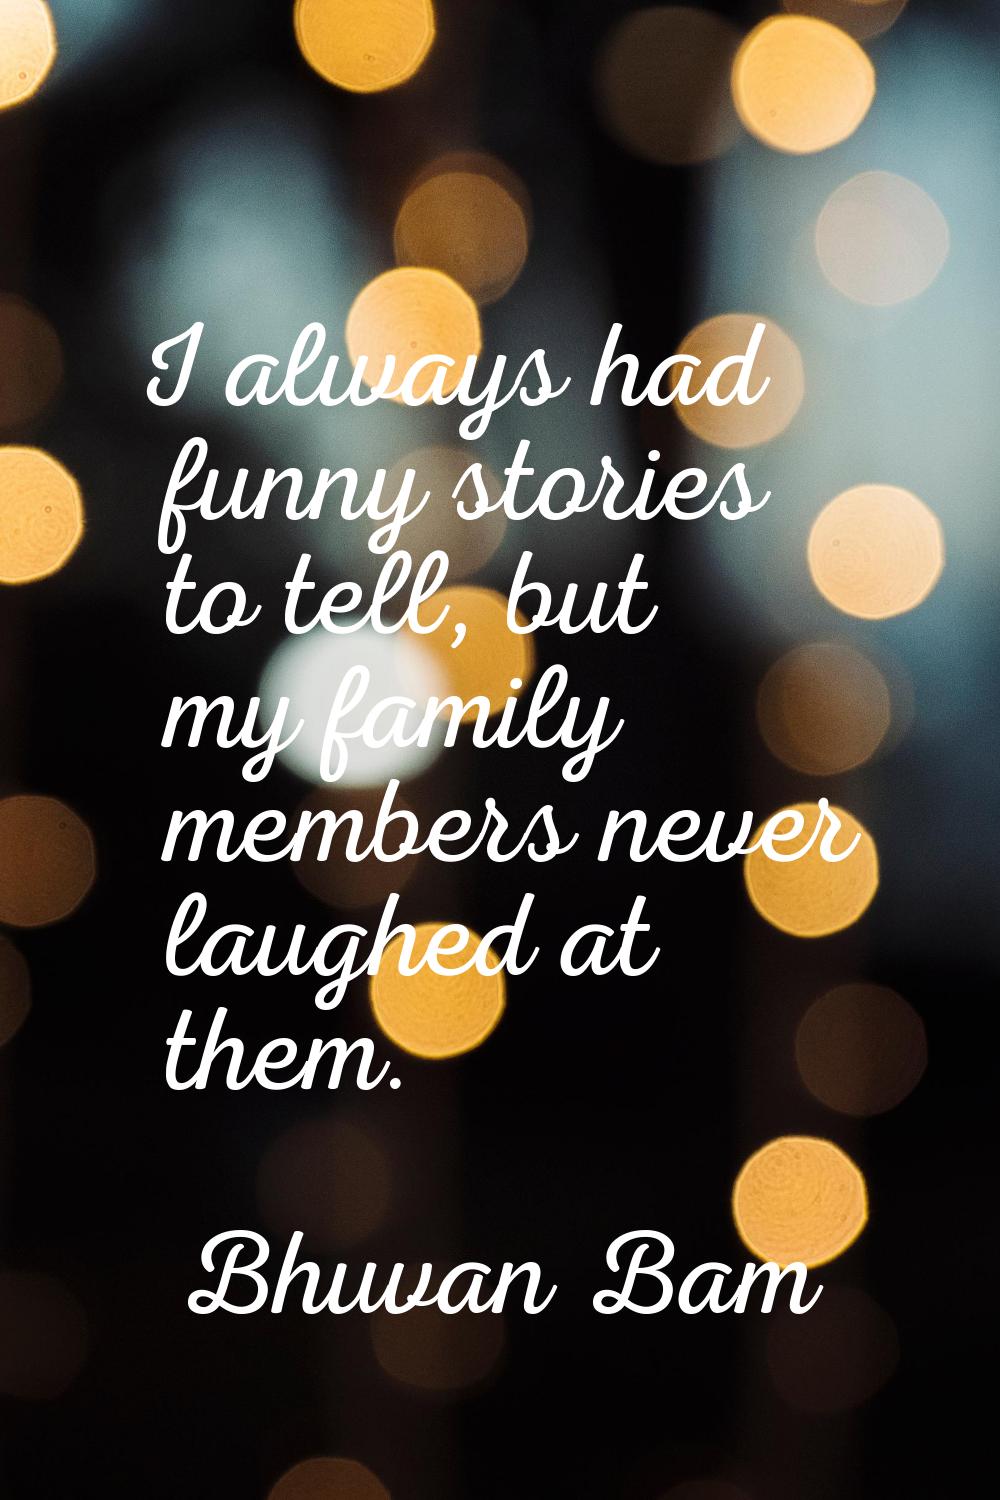 I always had funny stories to tell, but my family members never laughed at them.